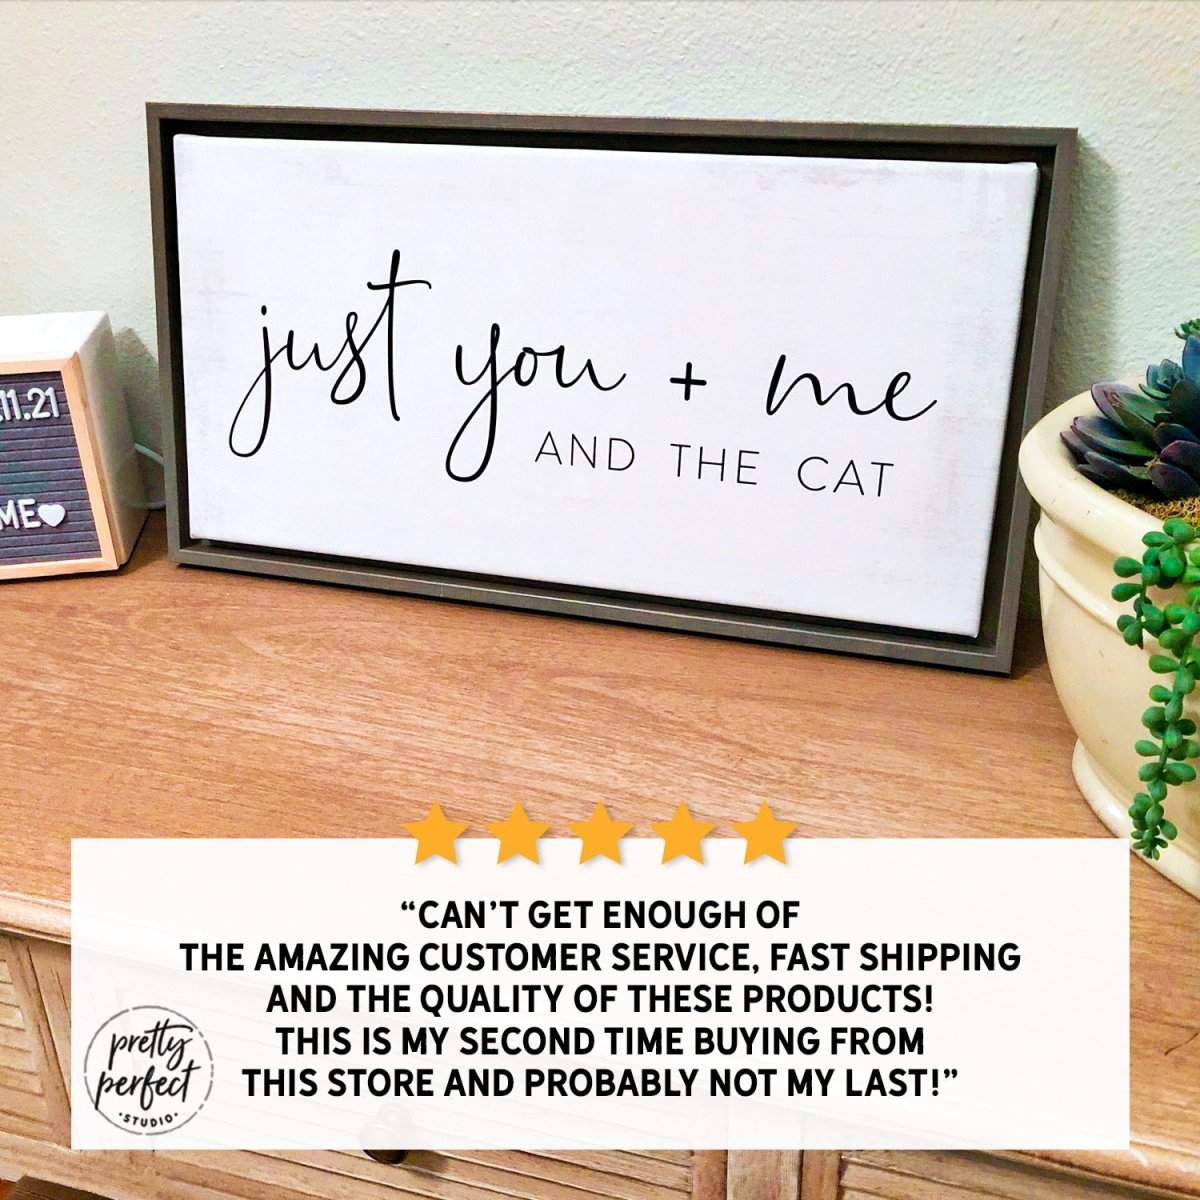 Customer product review for just you me and the cat sign by Pretty Perfect Studio